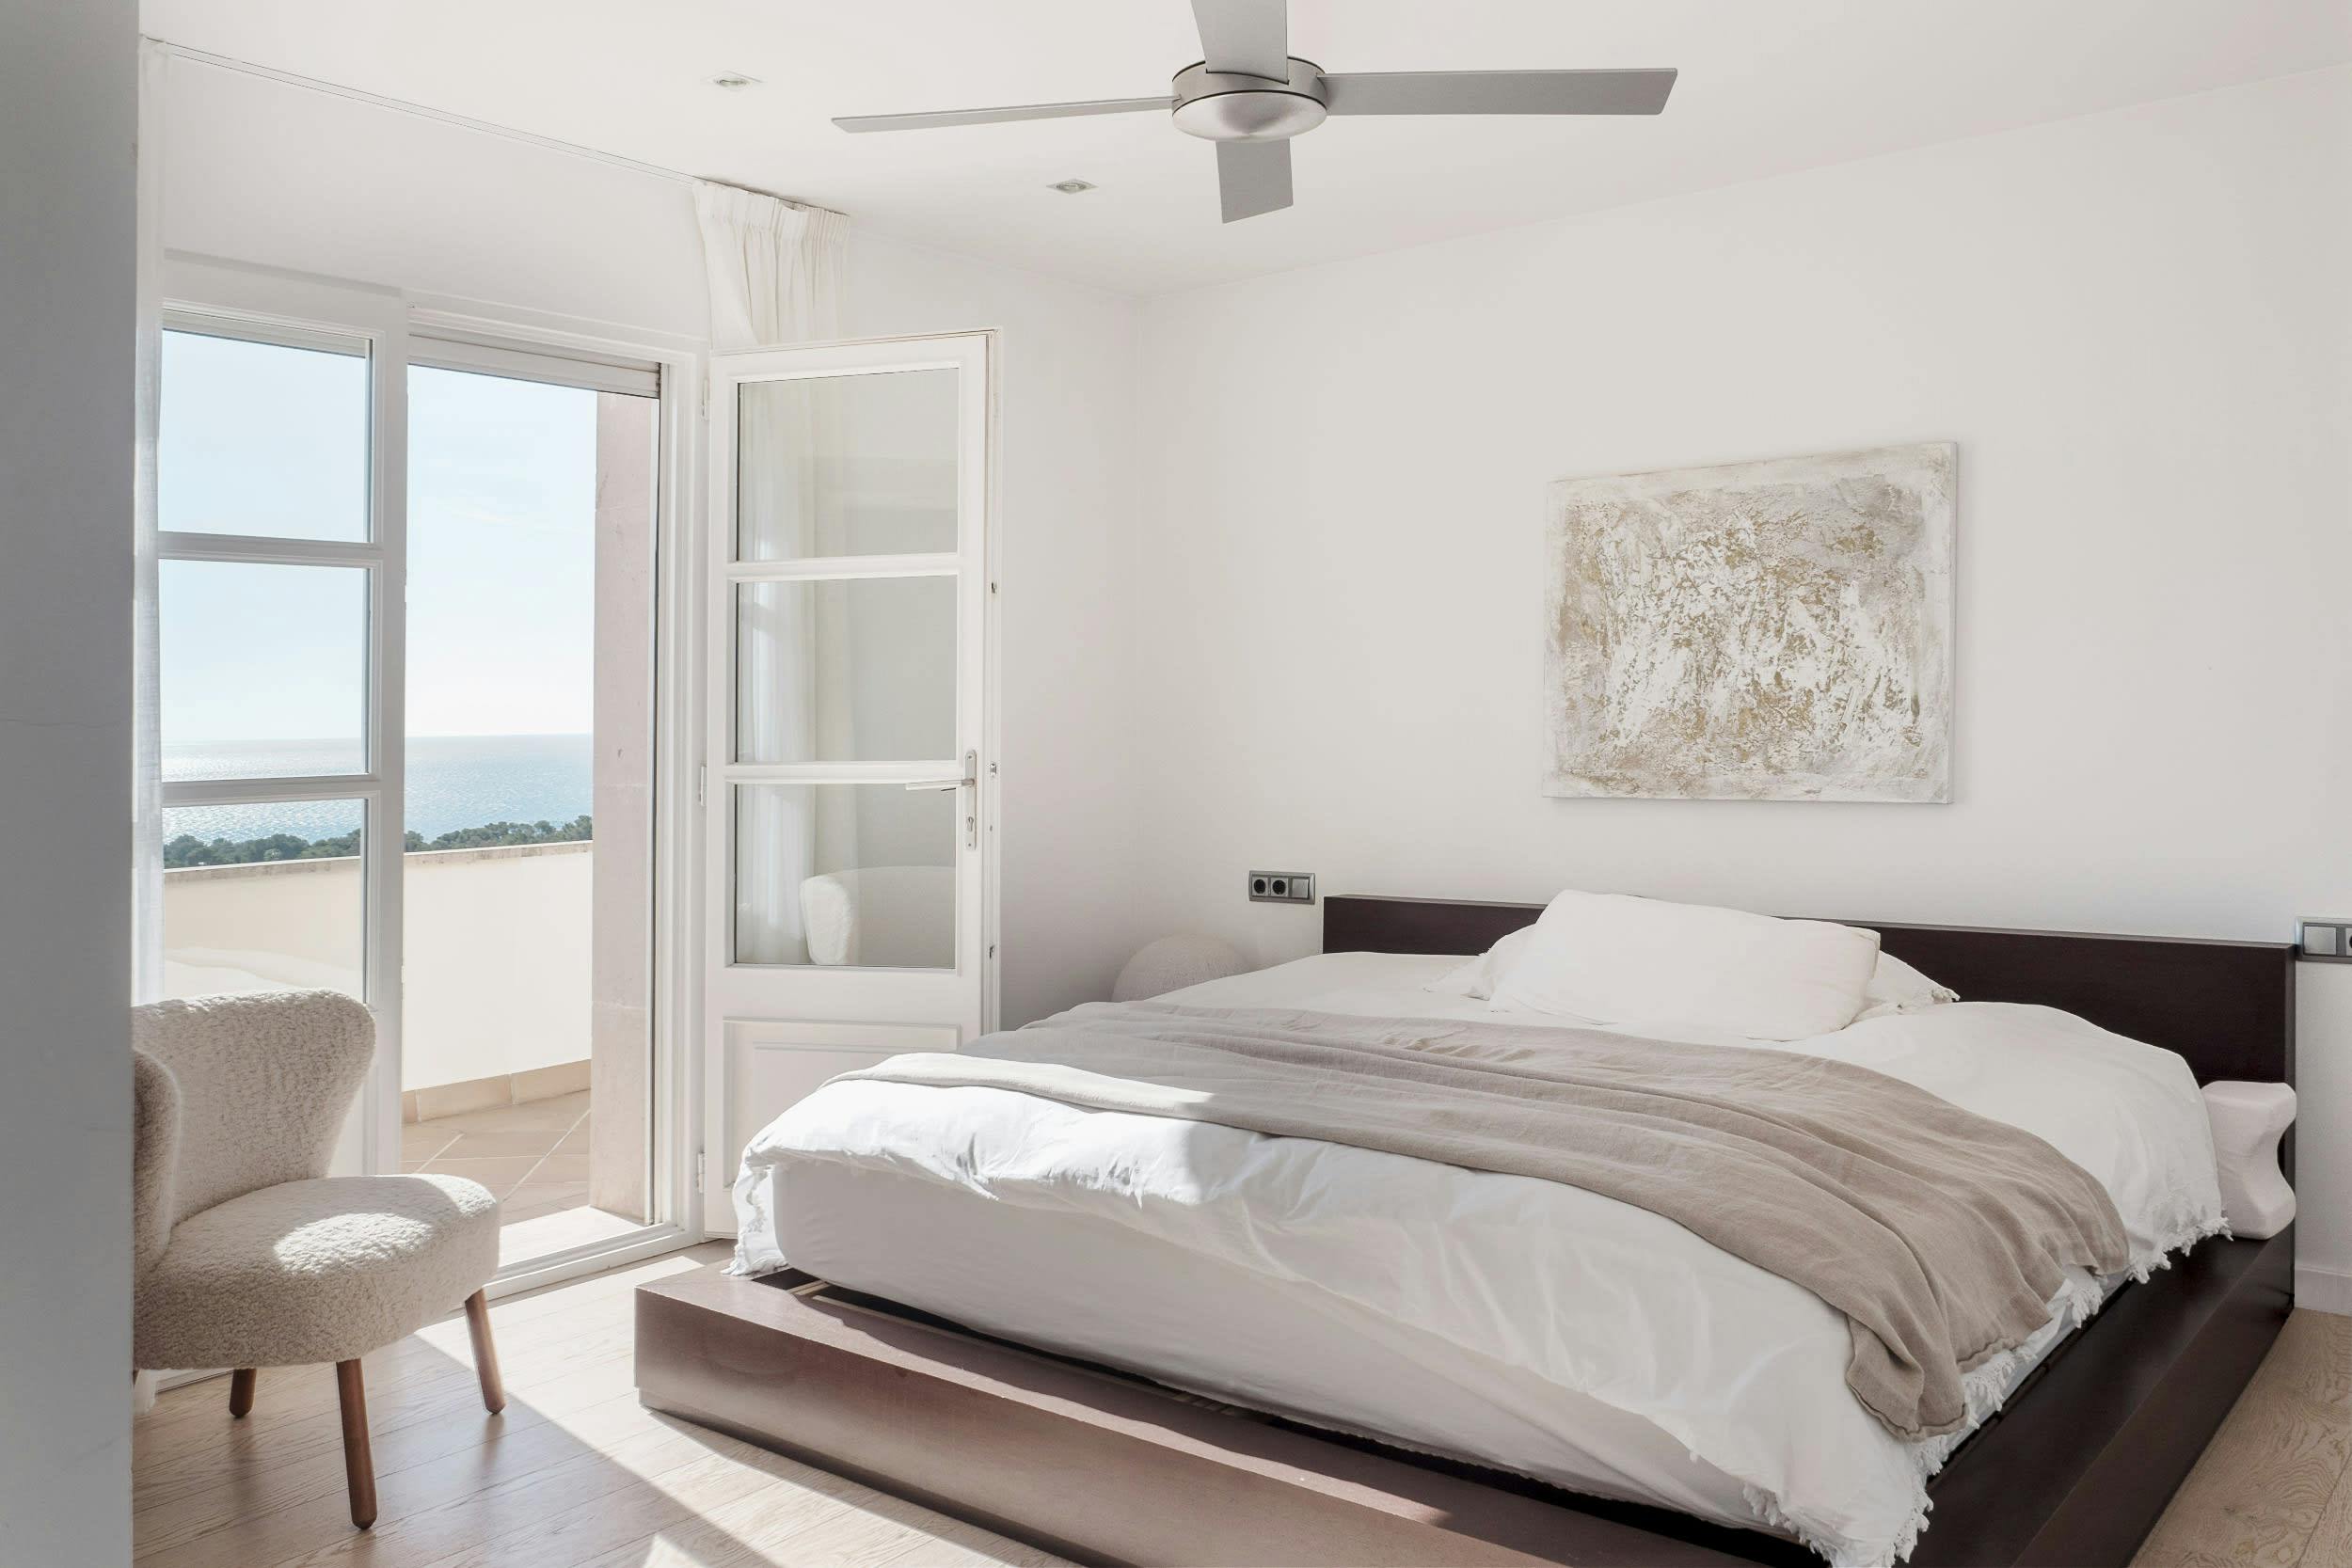 The image features a large, modern bedroom with a white bed and a white headboard. The bed is neatly made, and there is a white comforter on the bed. The room has a large window that offers a view of the ocean, creating a serene and picturesque atmosphere.

A chair is placed near the bed, providing a comfortable seating area for relaxation or reading. A clock can be seen on the wall, adding a touch of functionality to the room. The room also has a ceiling fan, which helps circulate air and maintain a comfortable temperature.

In addition to the b